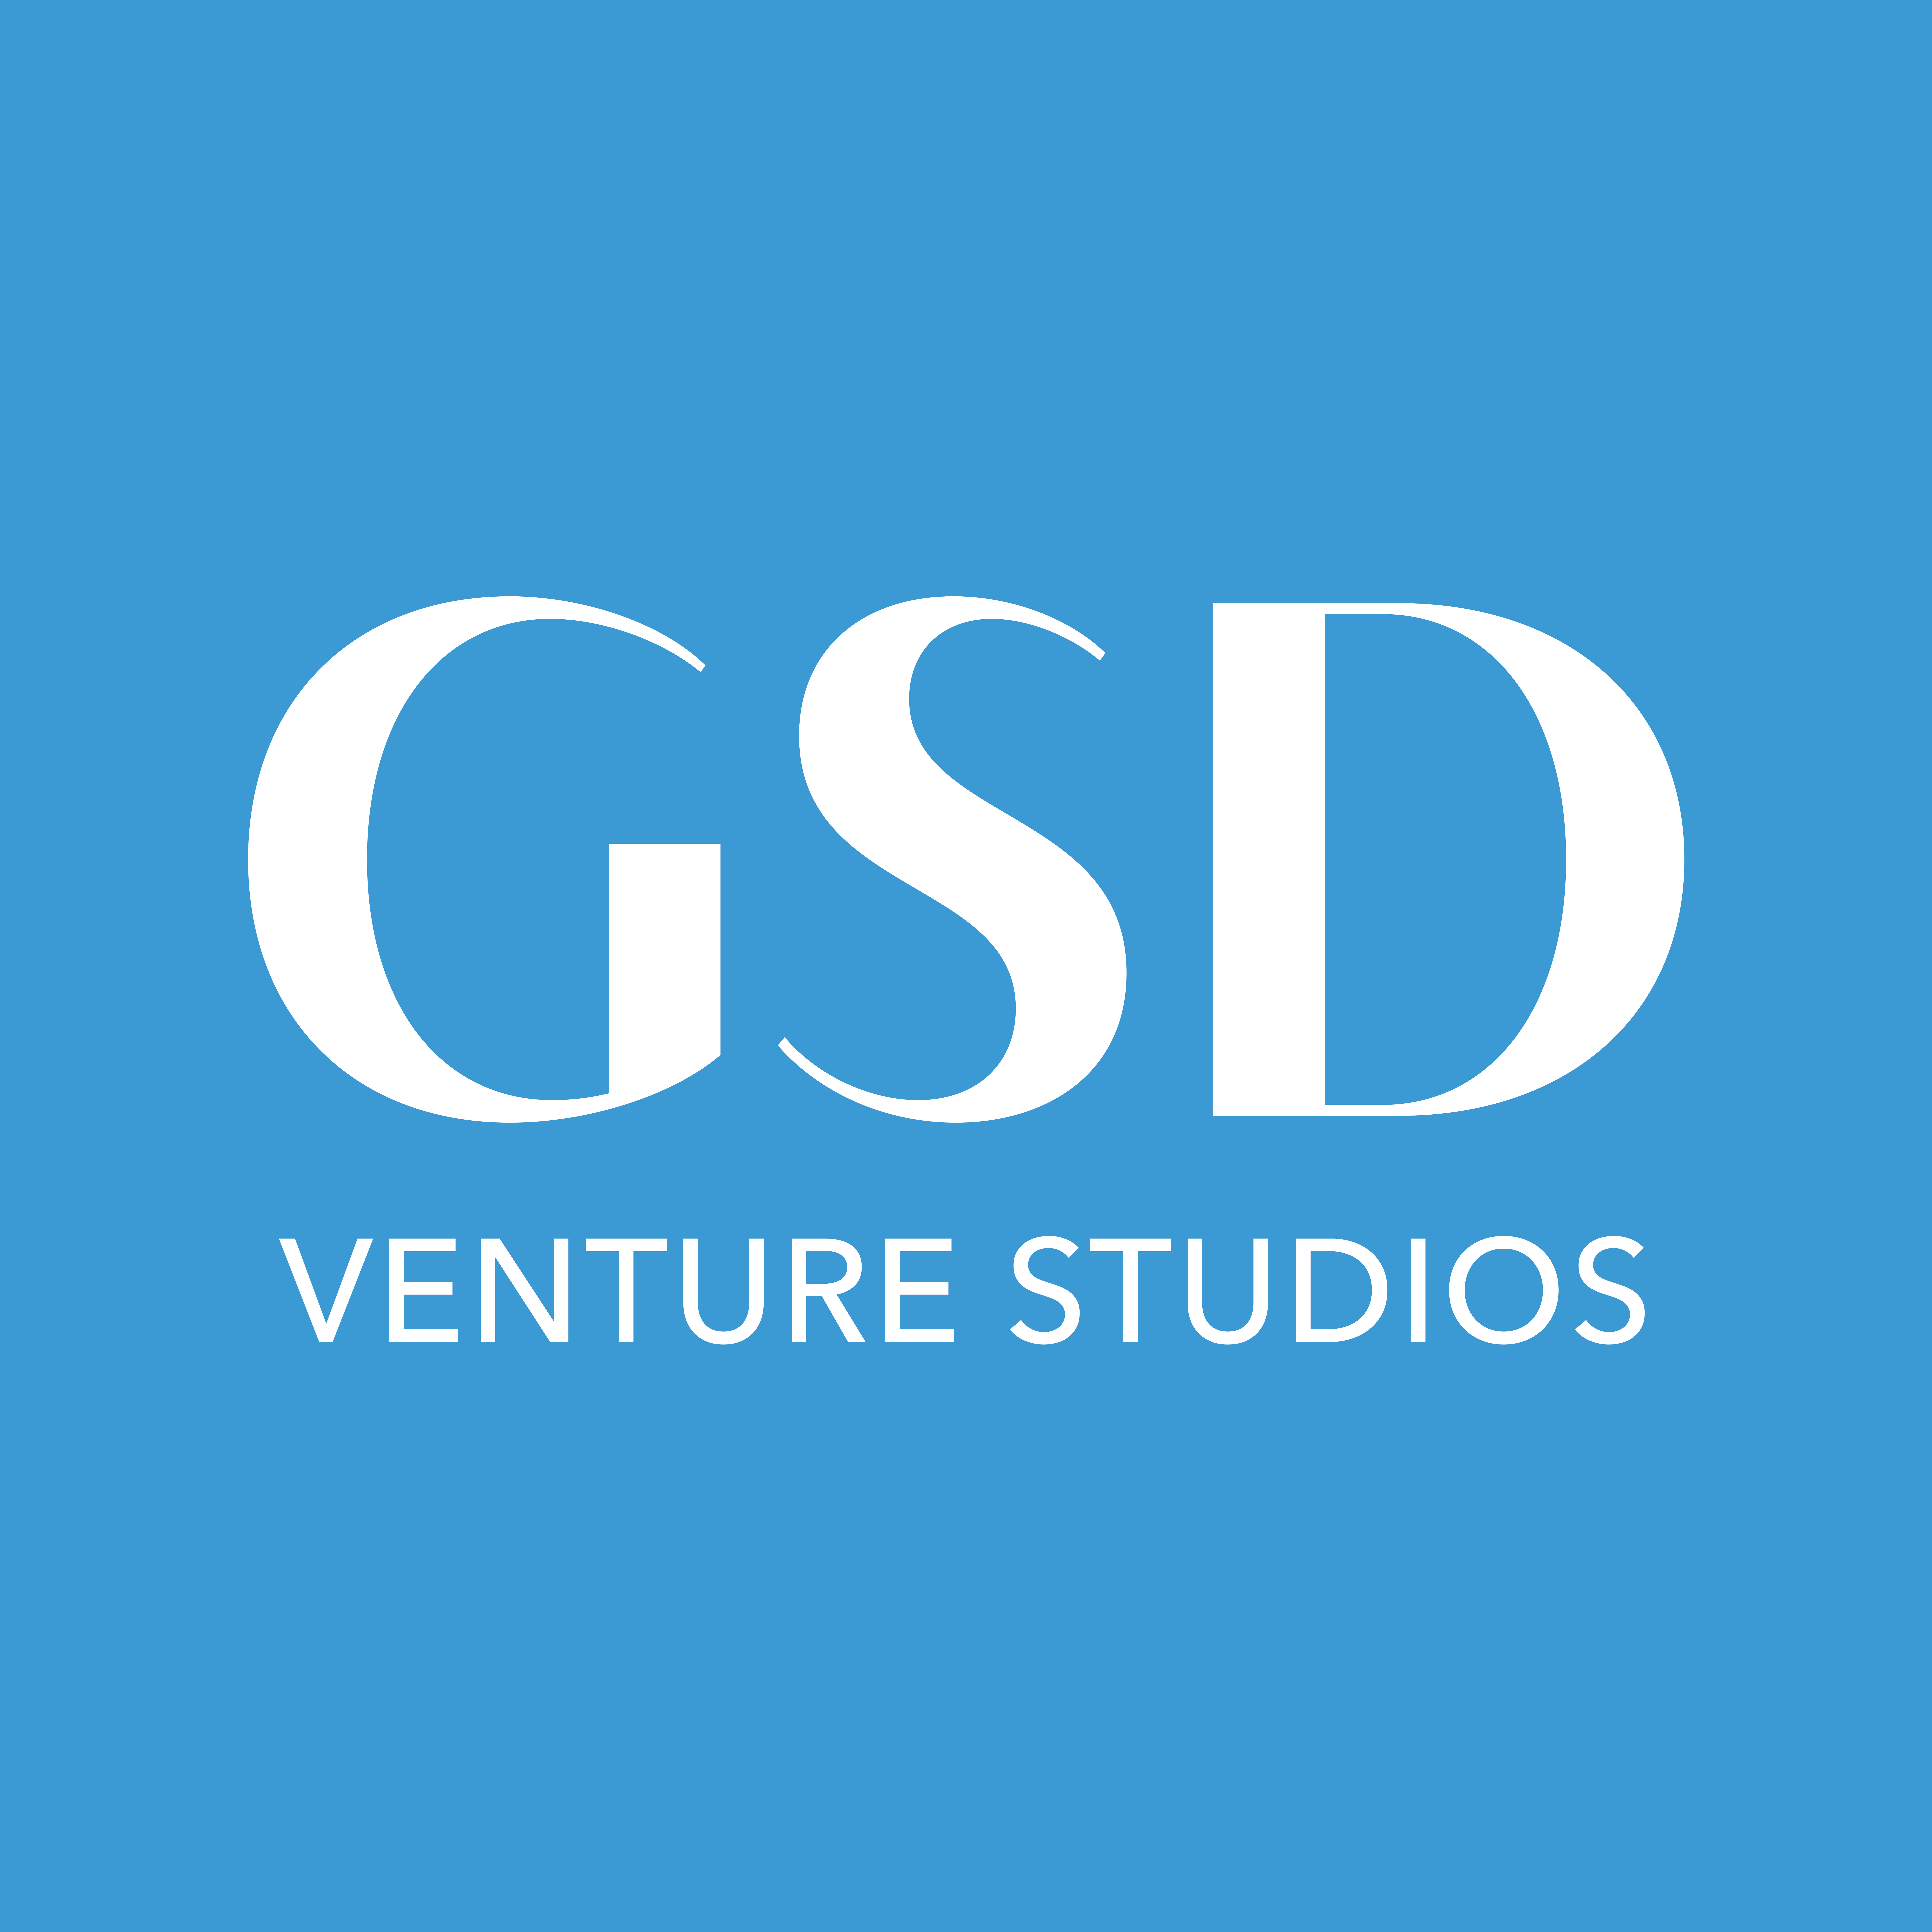 GSD Venture Studios LLC, Tuesday, September 29, 2020, Press release picture